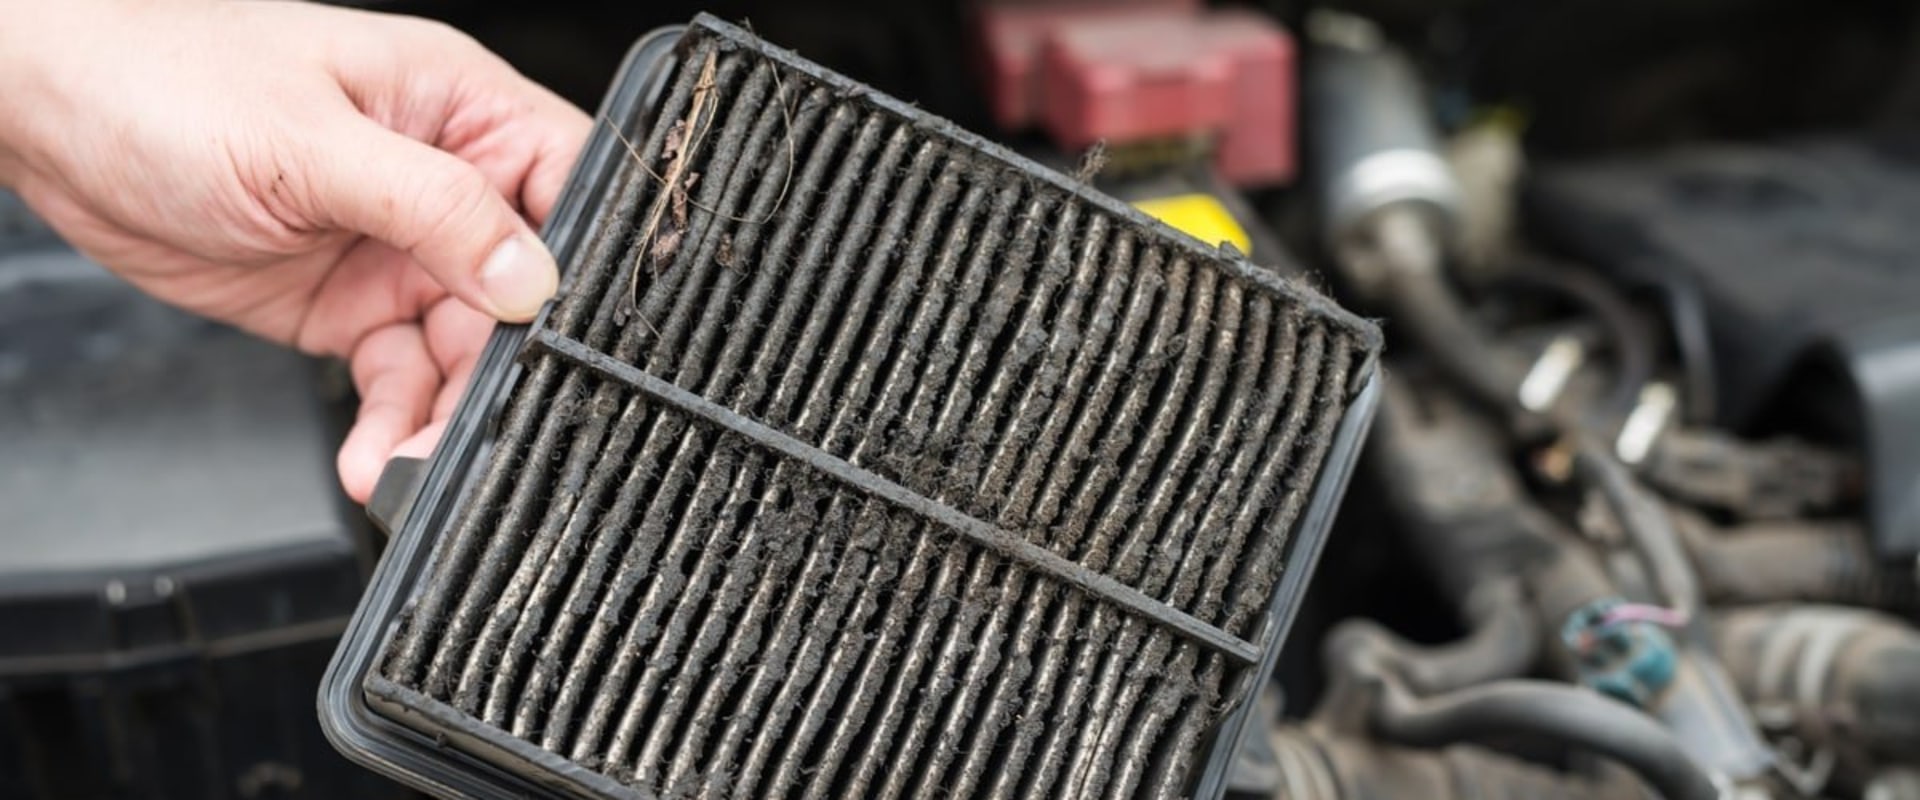 Can You Drive with a Dirty Air Filter?